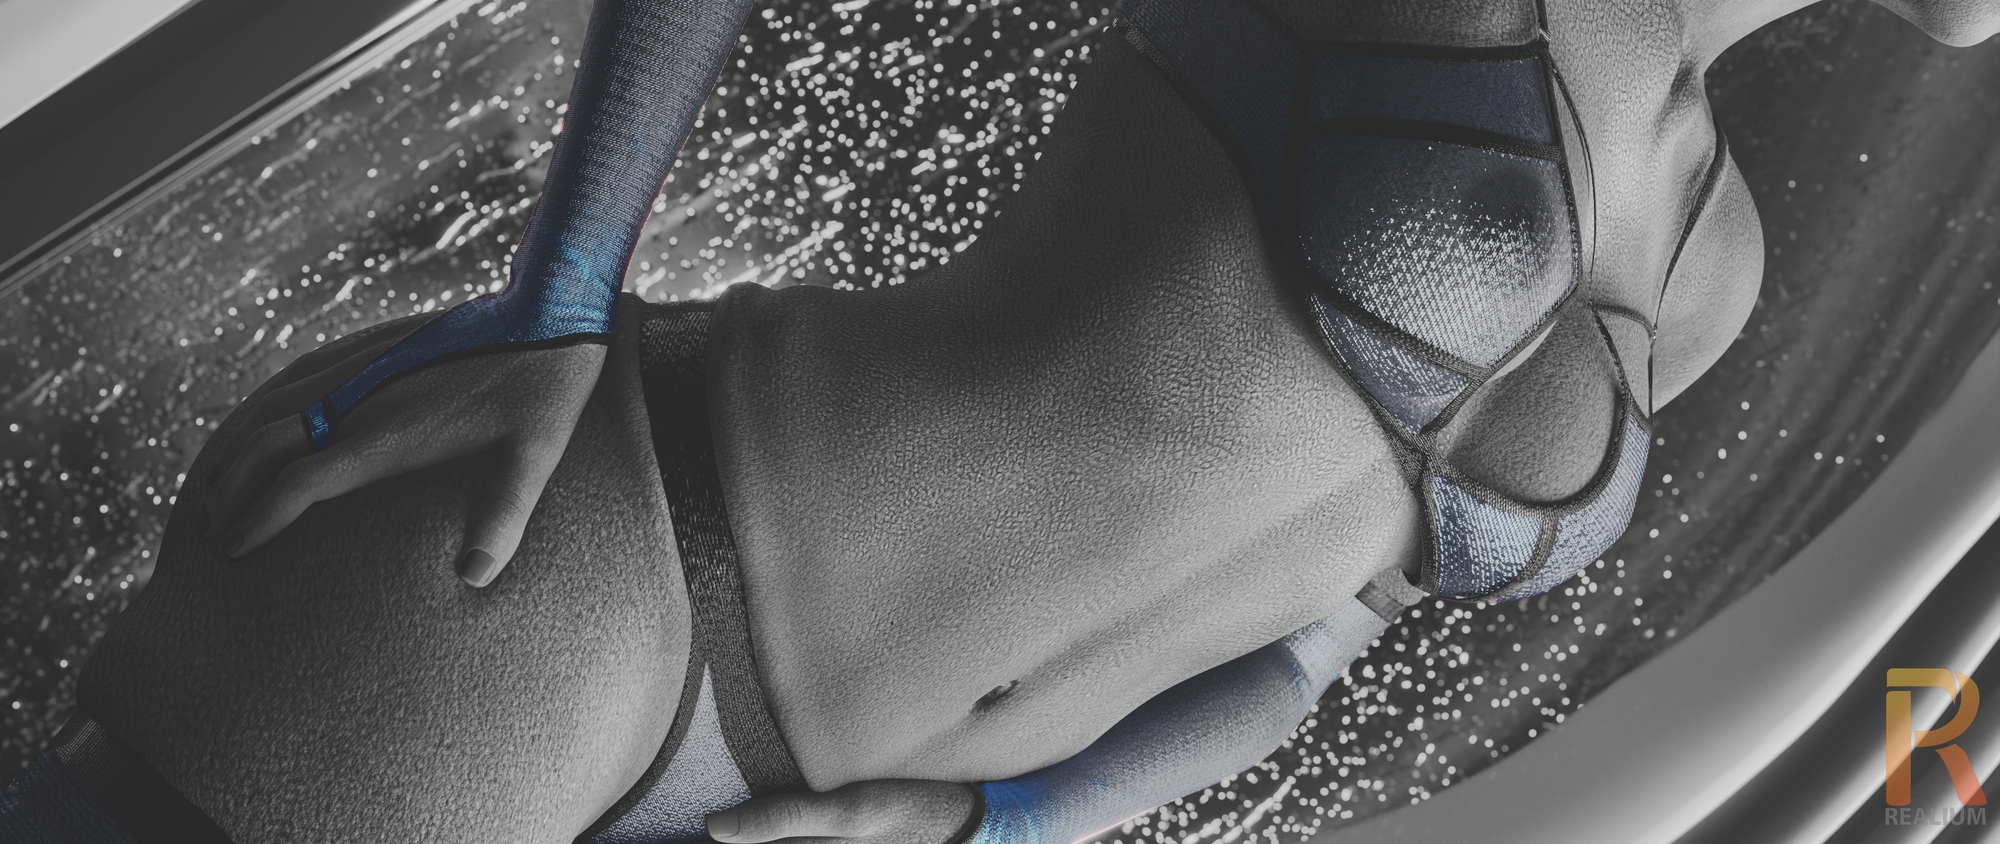 LIARA PINUP PART 1 Liara T'soni Liara T Soni Liara Mass Effect Asari (mass Effect) Pink Nipples Pinup Pregnant Lingerie Sexy Lingerie Nude Partially_nude Black And White Gloves Stockings 7